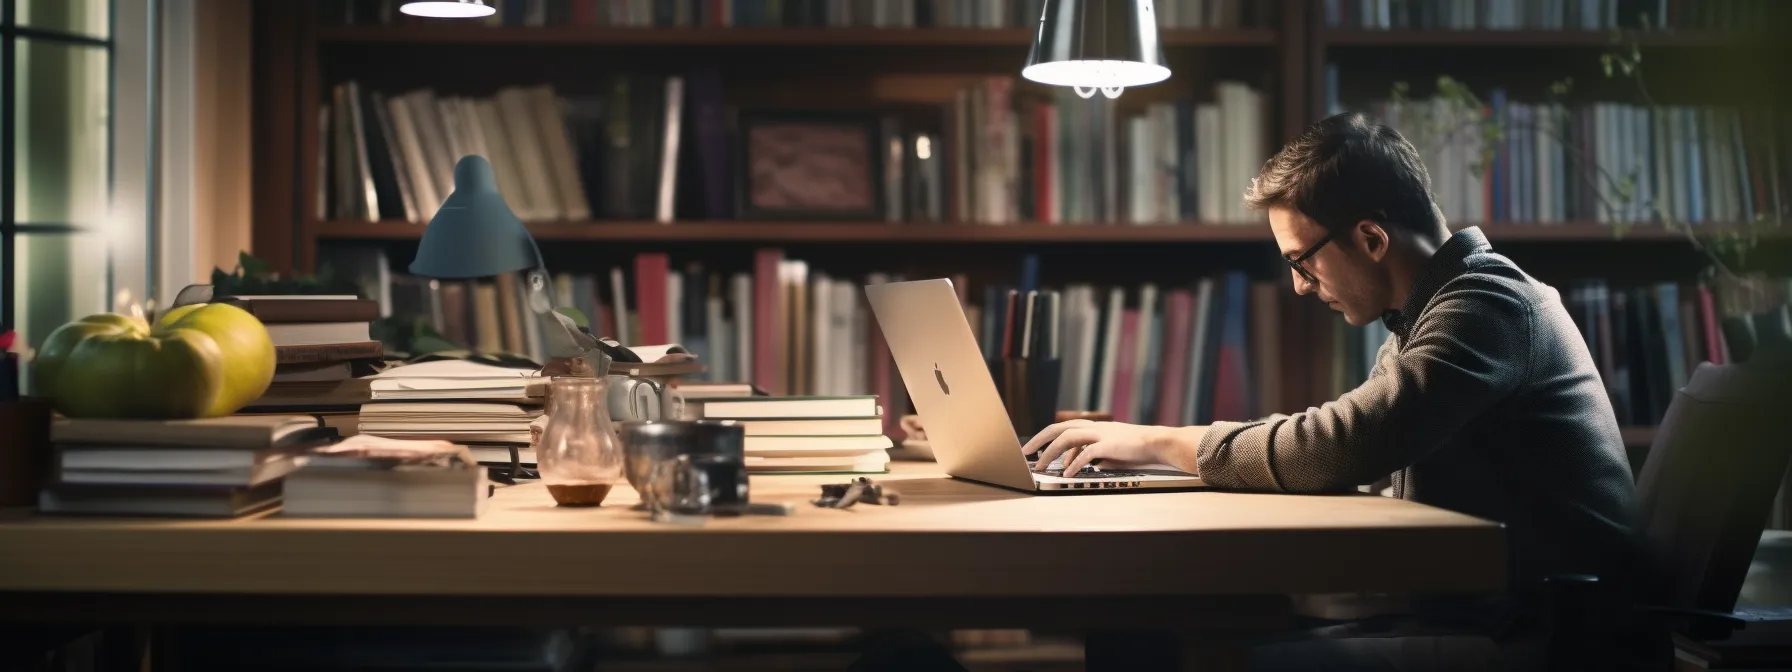 a person working on a laptop with a cup of coffee while surrounded by books and research materials.